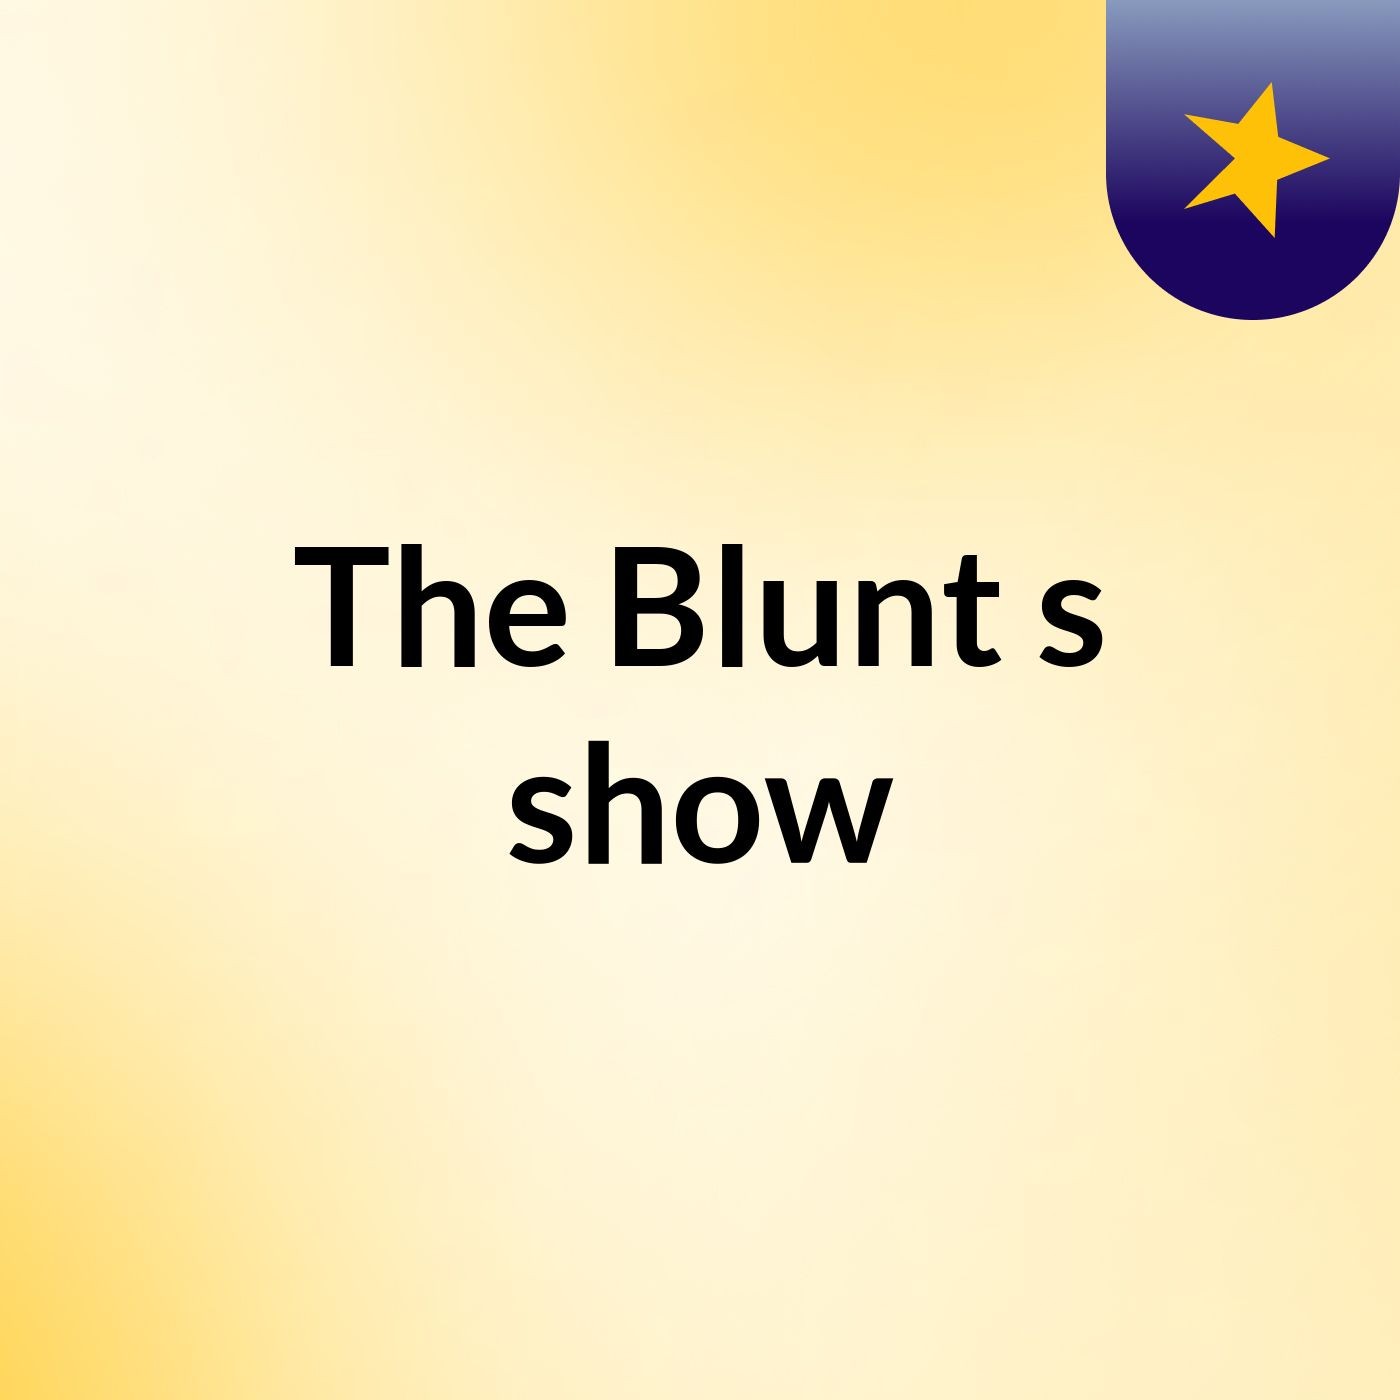 The Blunt's show